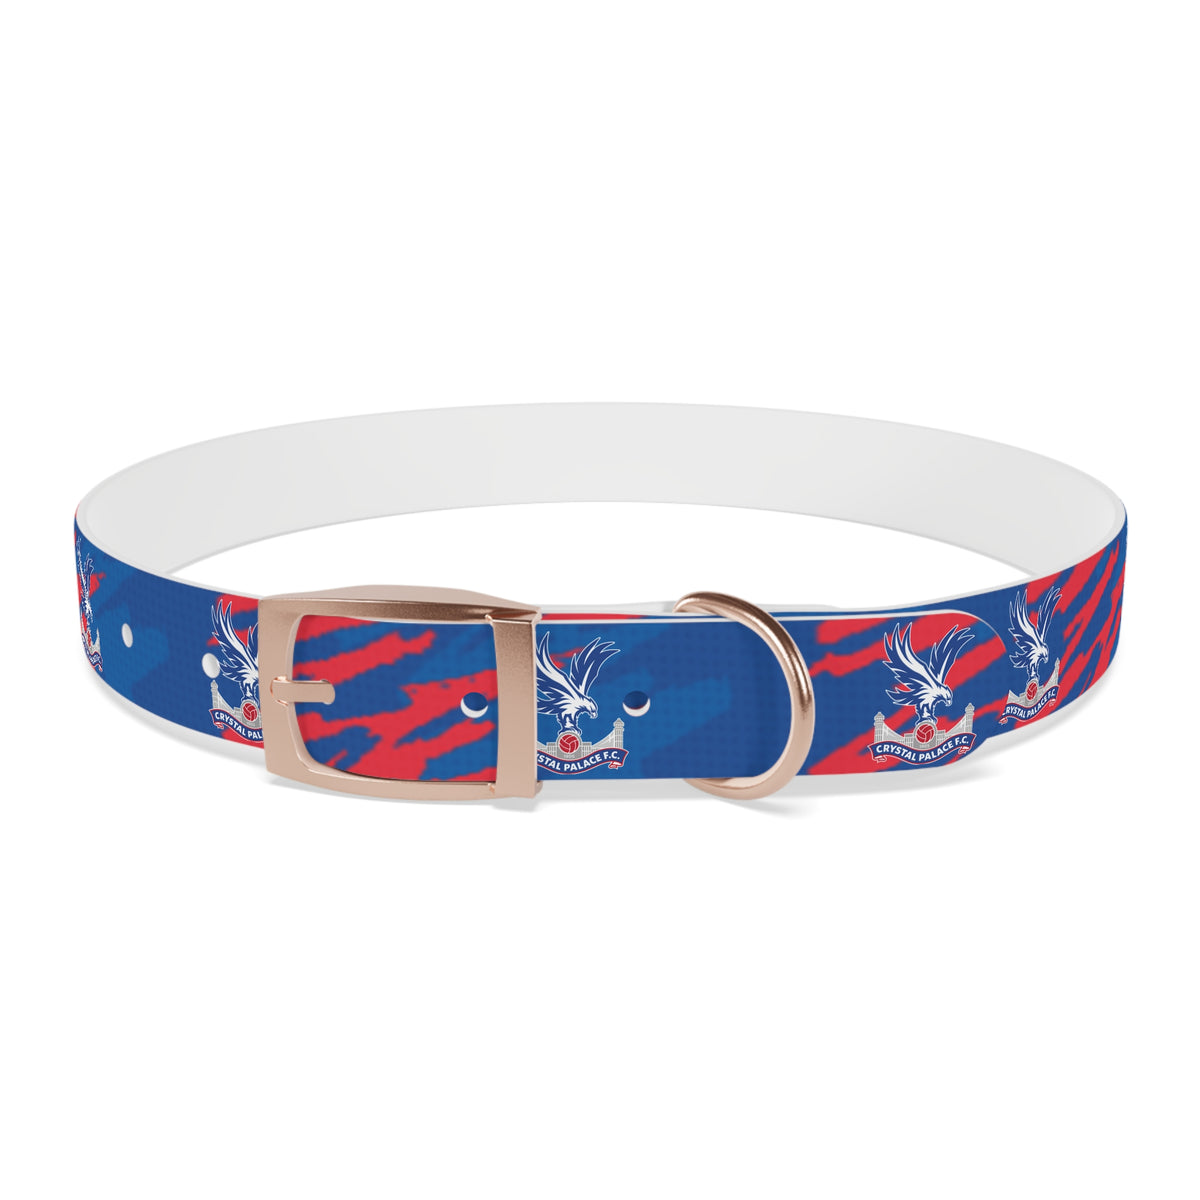 Crystal Palace FC 23 Home Inspired Waterproof Dog Collar - 3 Red Rovers